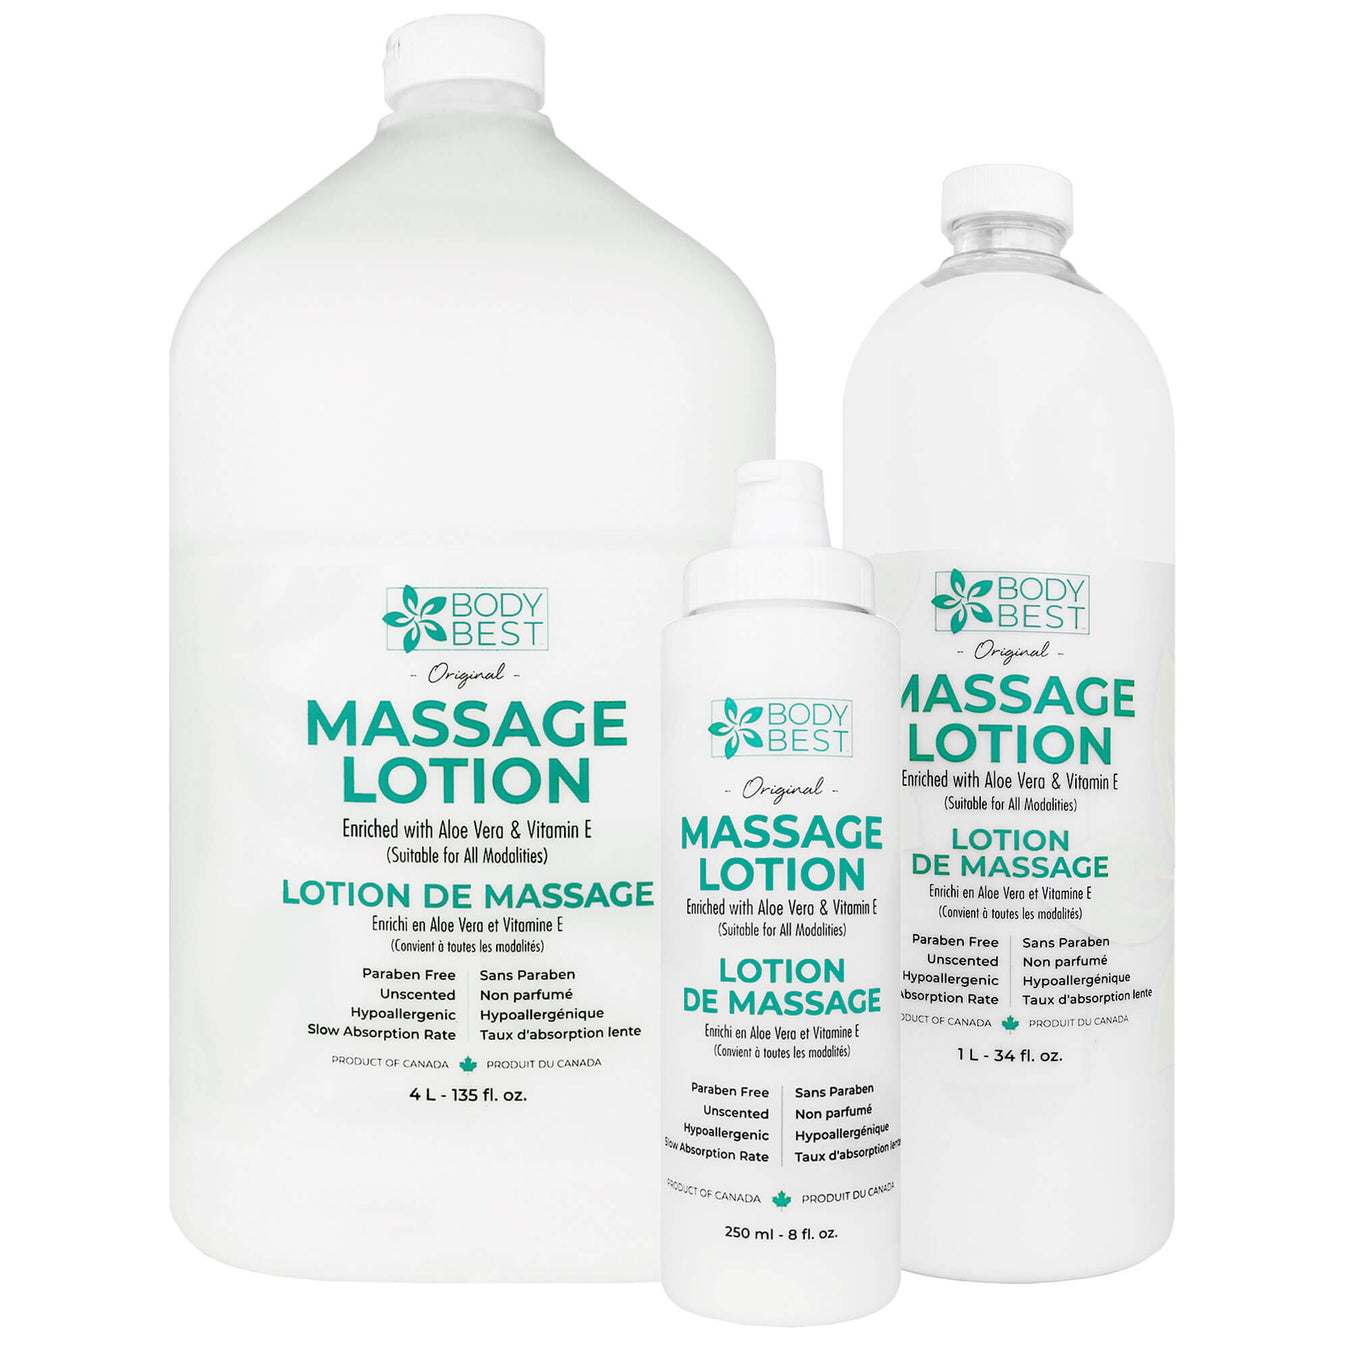 3 available sizes of BodyBest Massage Lotion